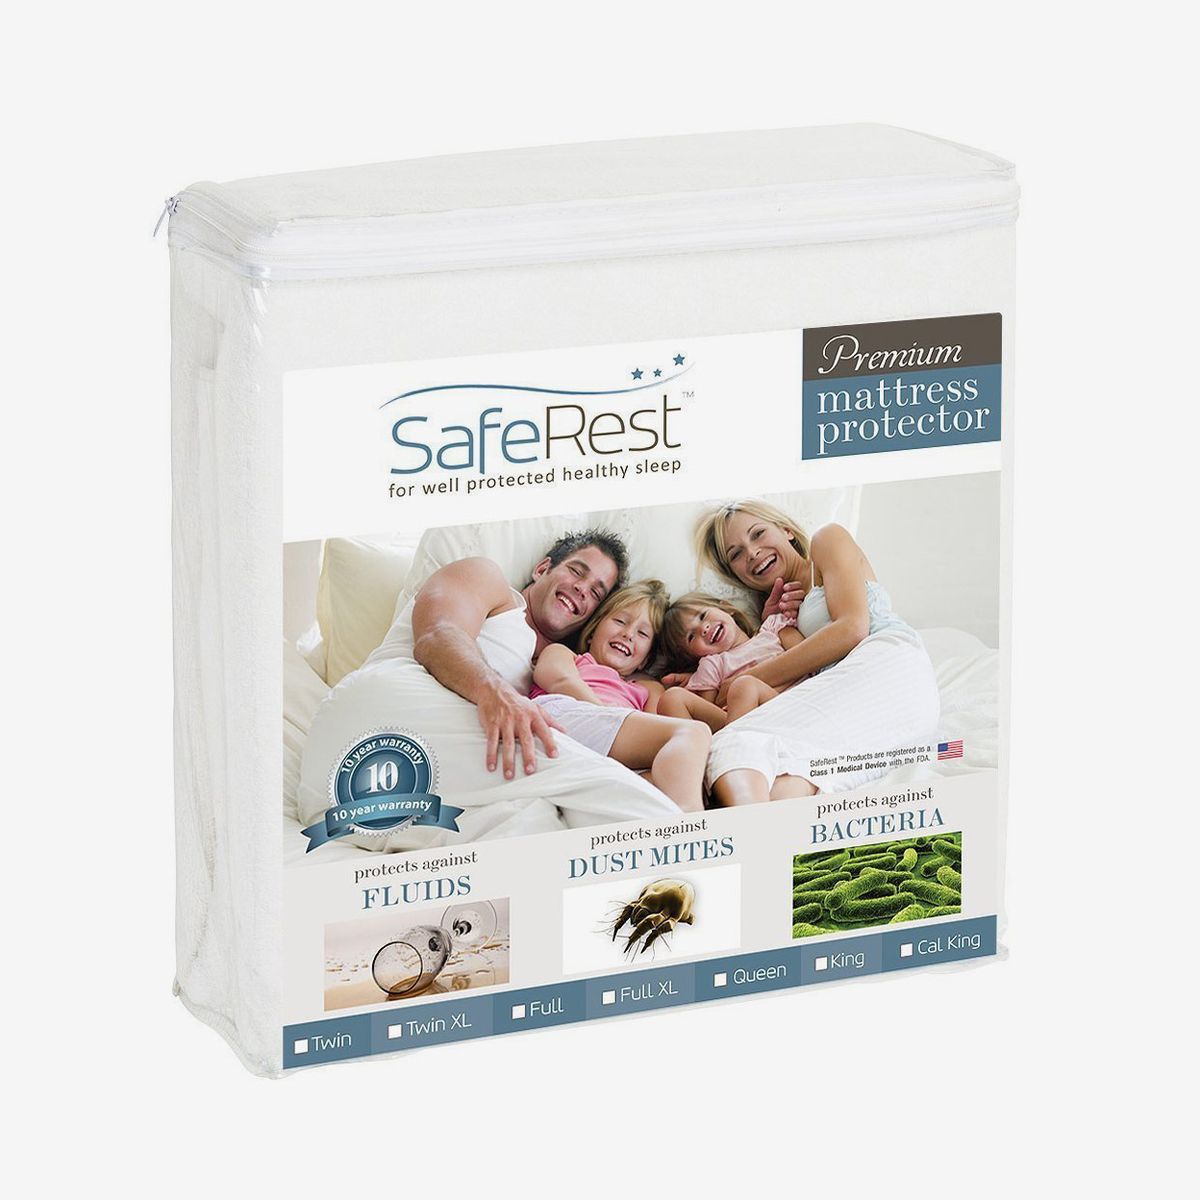 63 x 78.5 x 12 Blumtal QUILTED Mattress Protector EUROPEAN KING SIZE 160 x 200 x 30 cm Deep Mattress Protector Super Soft Padding Protection against Bed Bugs